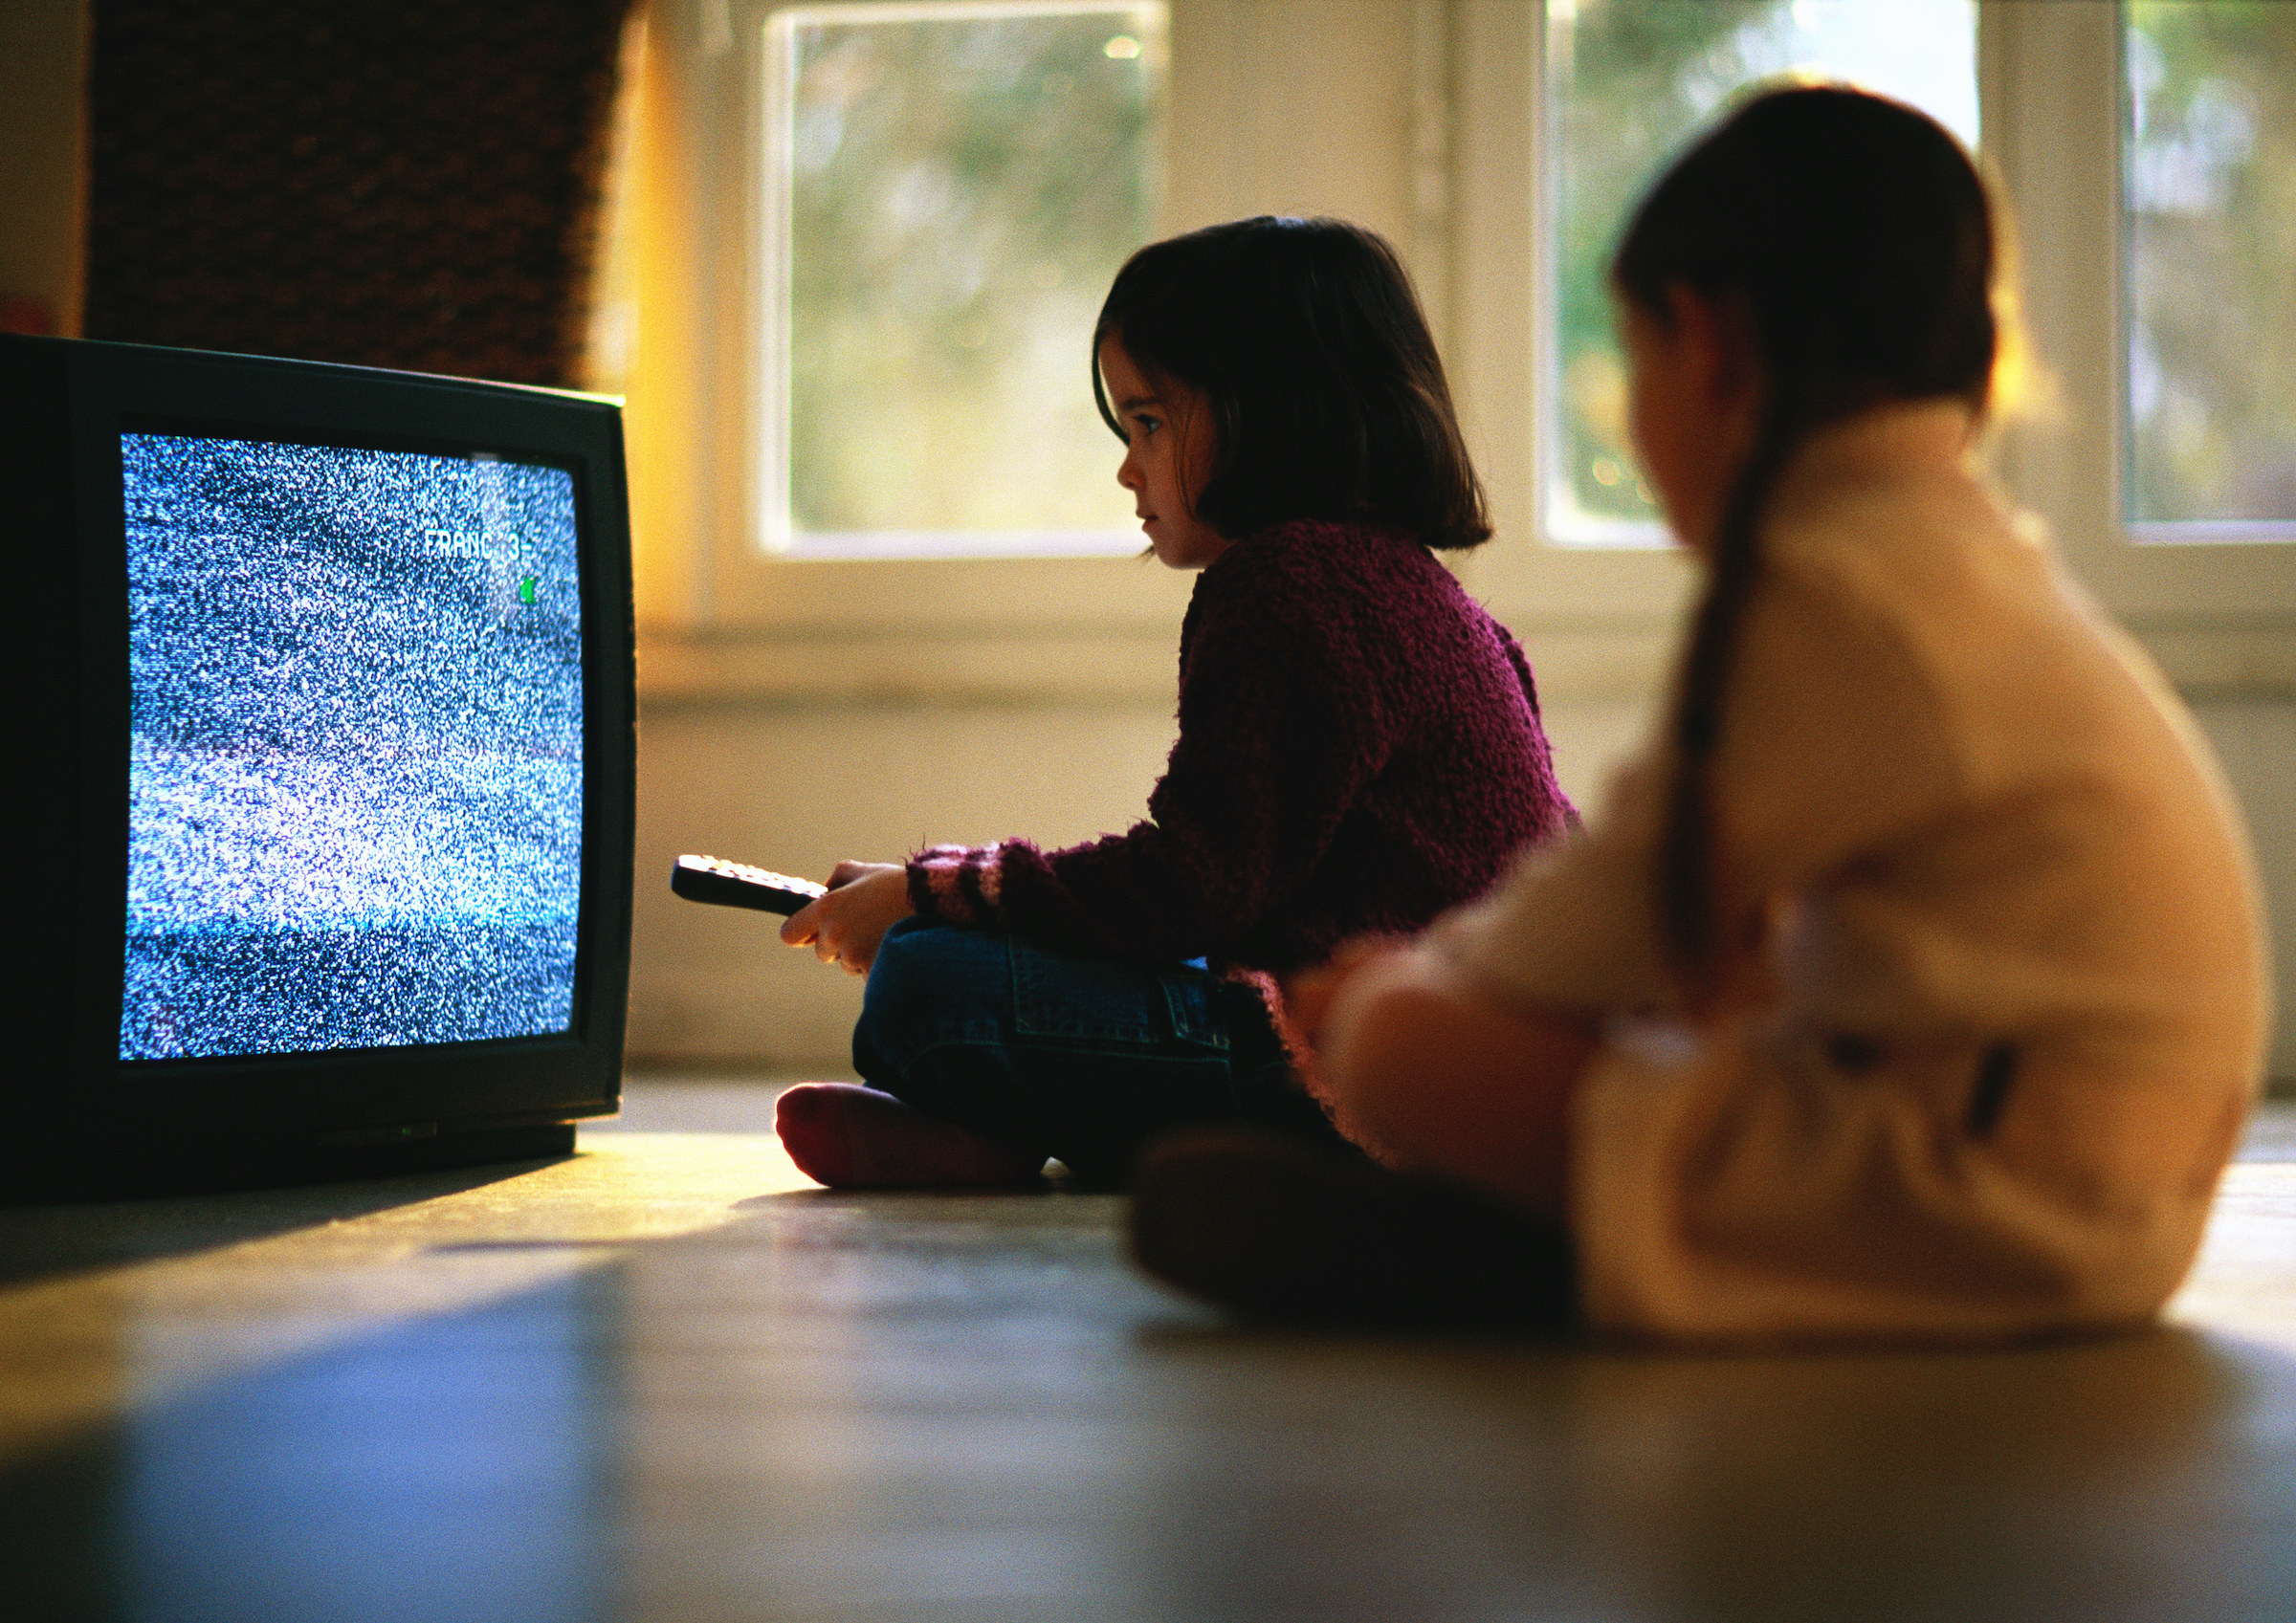 Two children sitting on the floor and looking at static on a TV